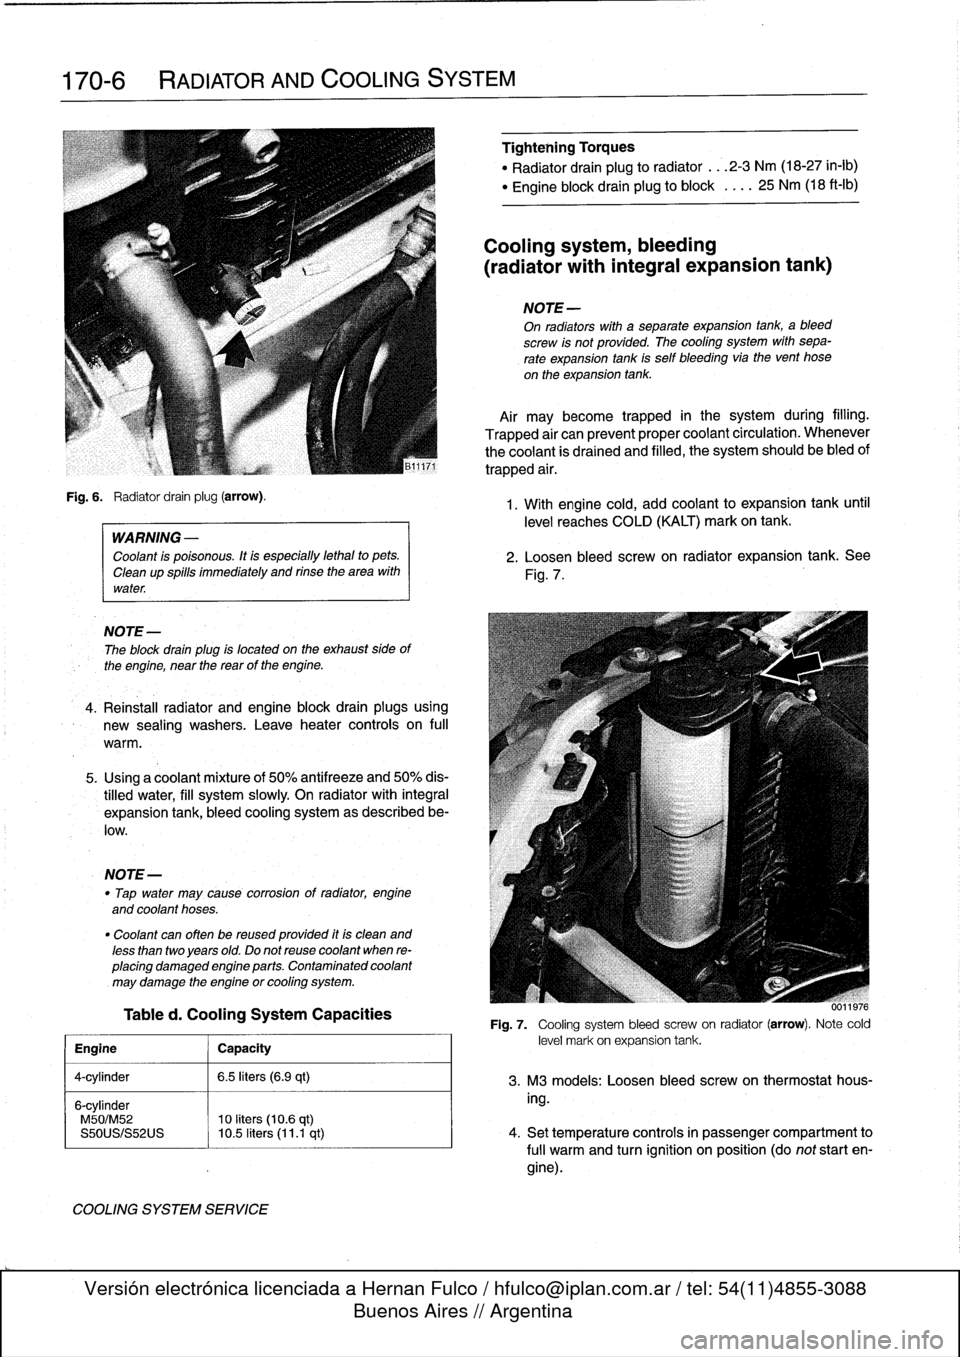 BMW 323i 1997 E36 Workshop Manual 
170-6

	

RADIATOR
AND
COOLING
SYSTEM

Fig
.
6
.

	

Radiator
drain
plug
(arrow)
.

WARNING
-

Coolant
is
poisonous
.
Itis
especially
lethal
to
pets
.

Cleanup
spills
immediately
and
rinse
the
area
w